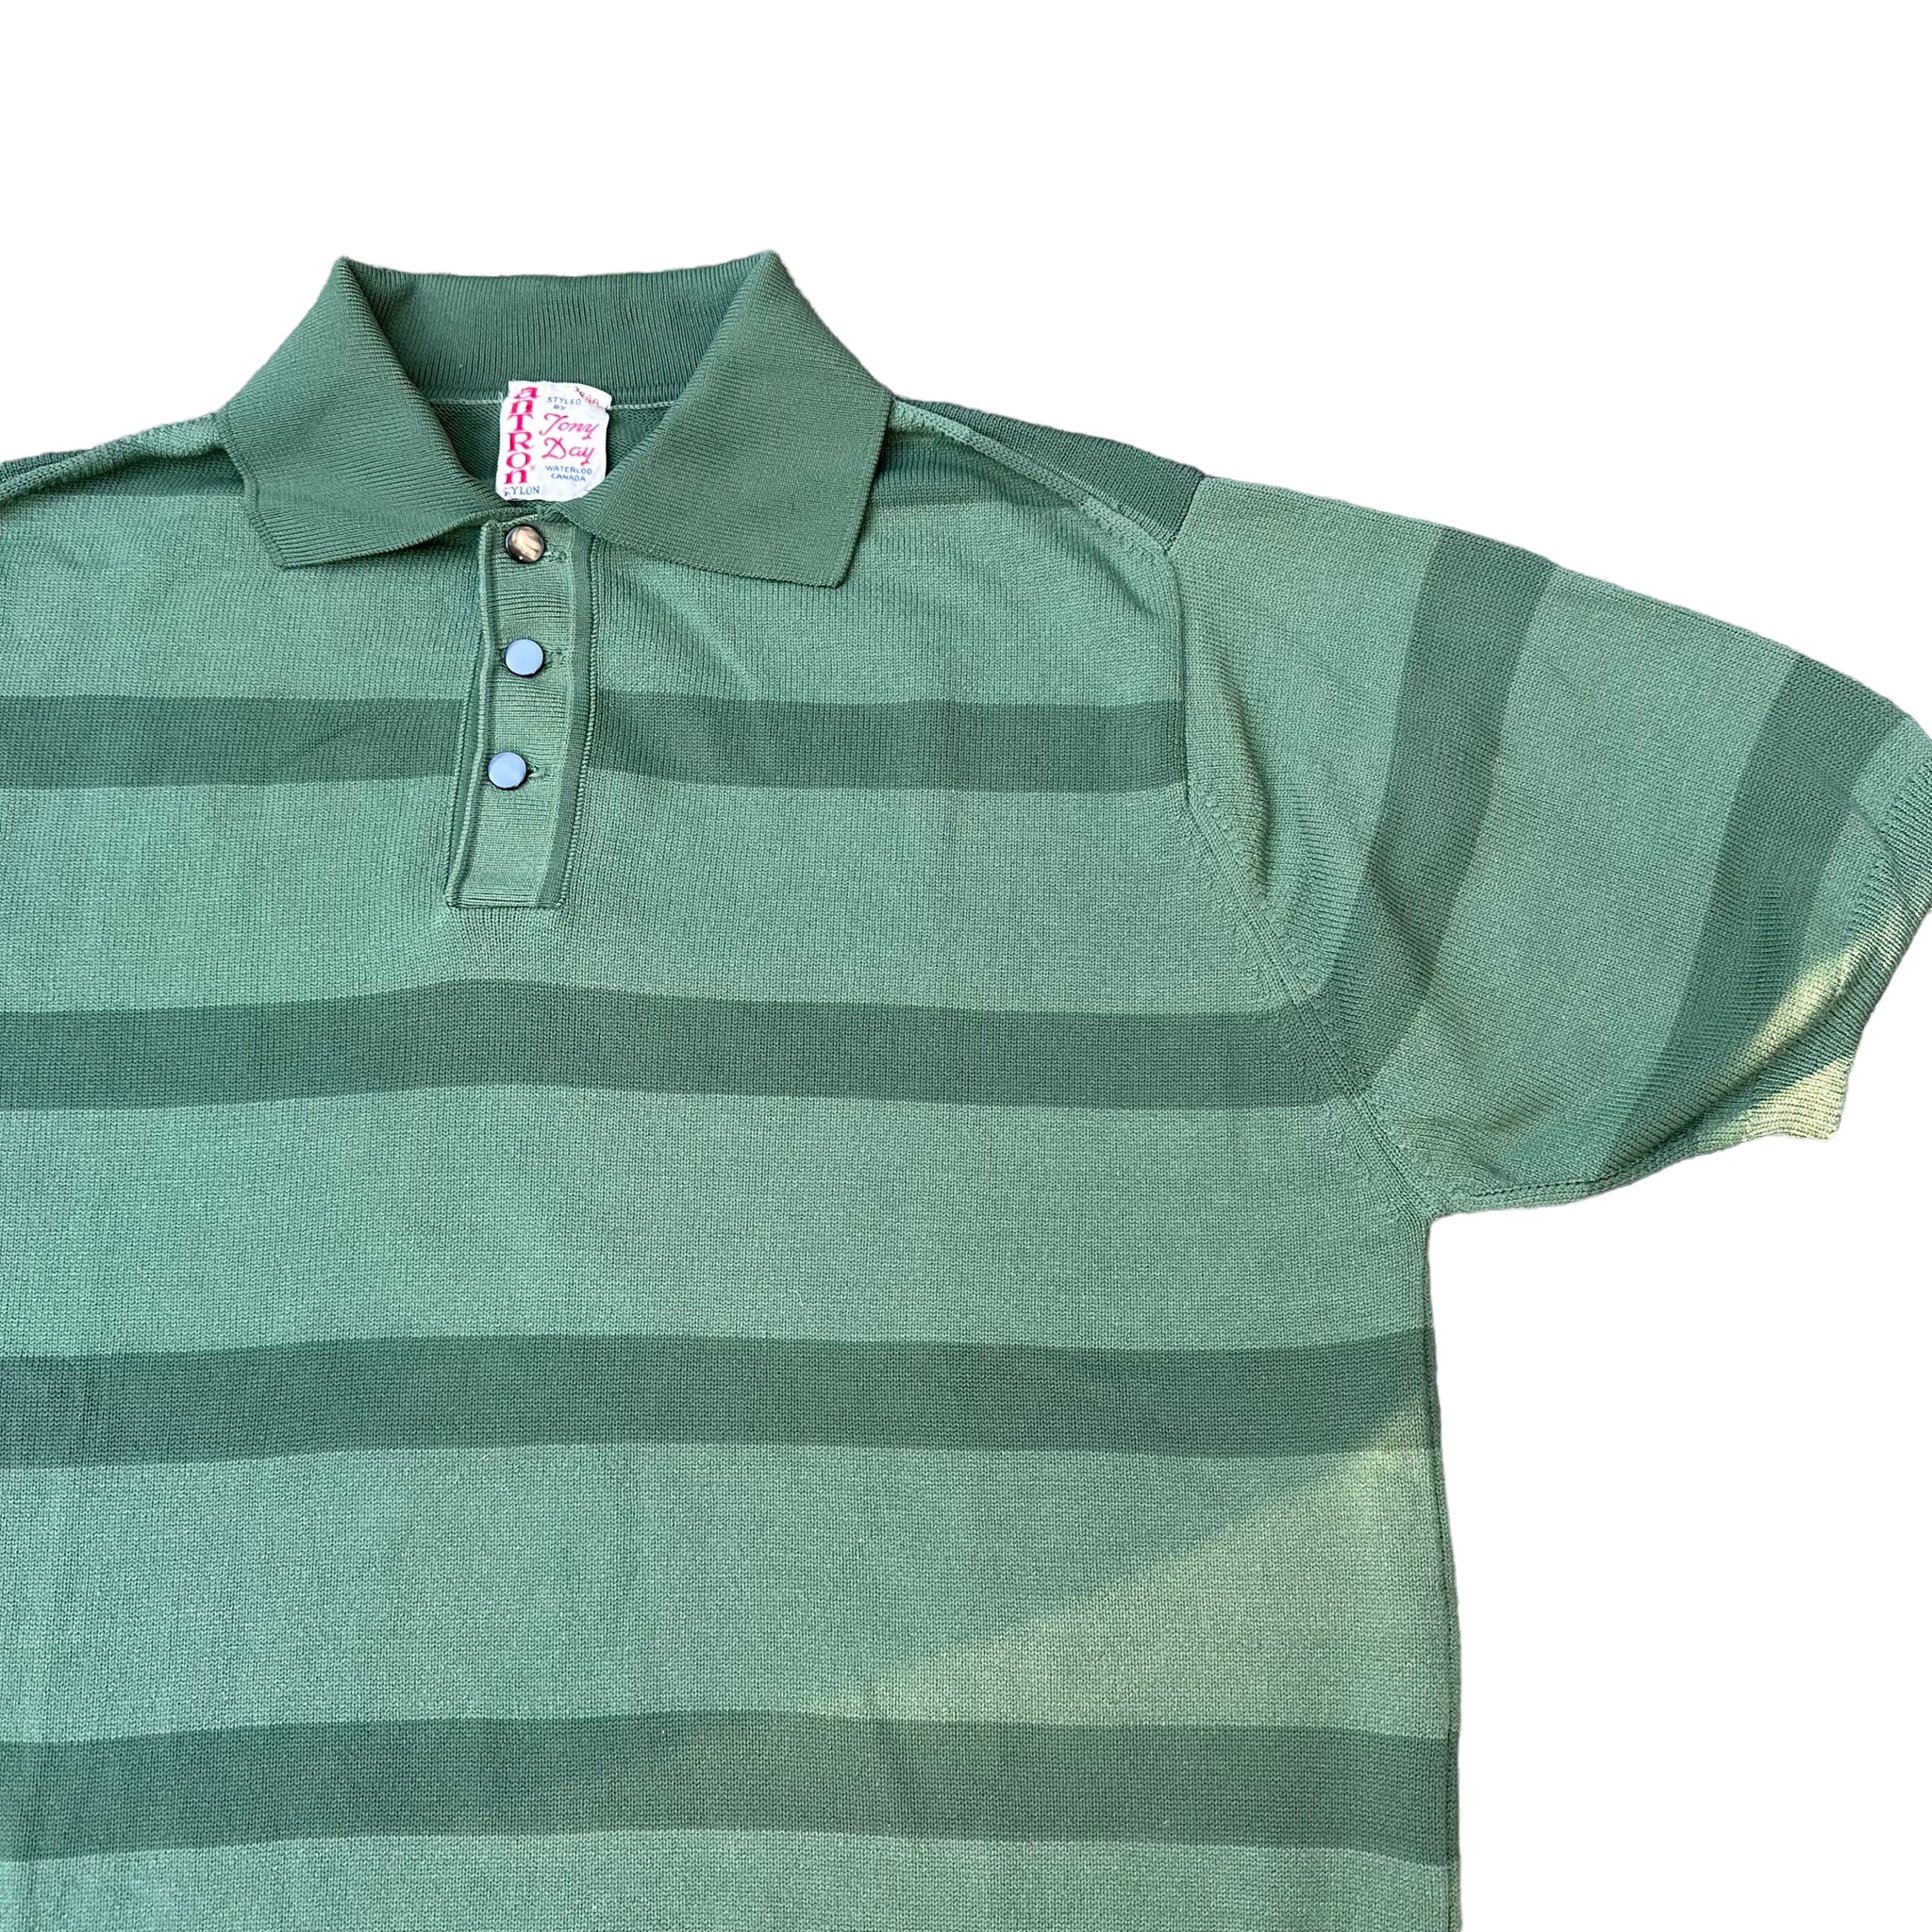 60s wise guy style polo.   M/L